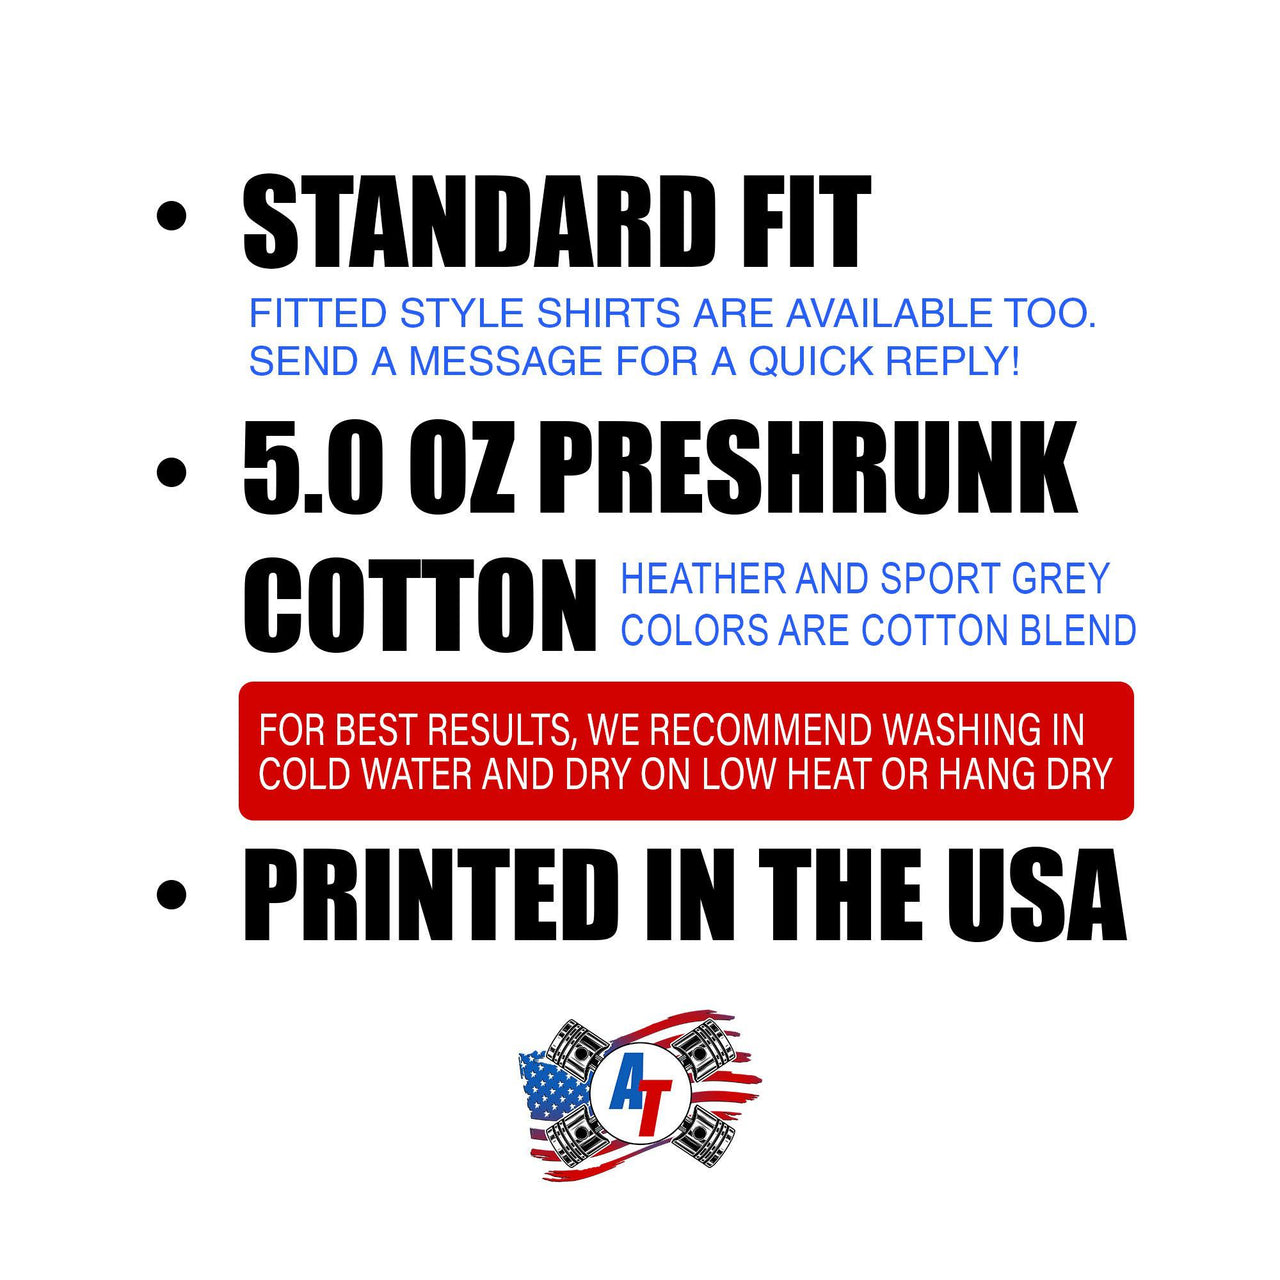 garment information and care instructions